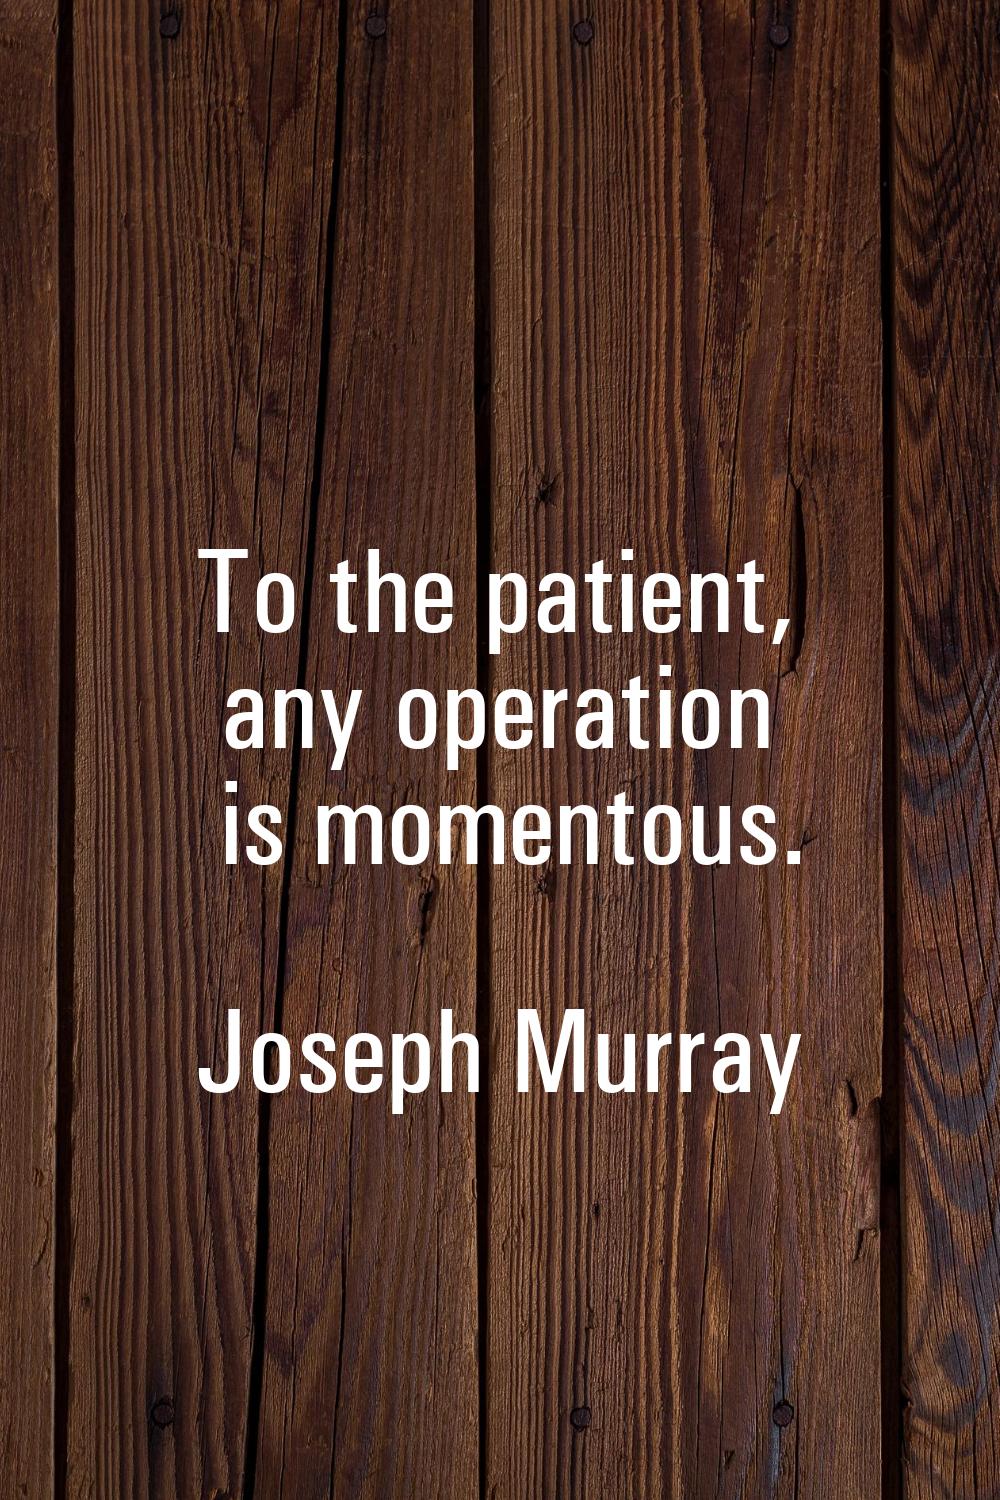 To the patient, any operation is momentous.